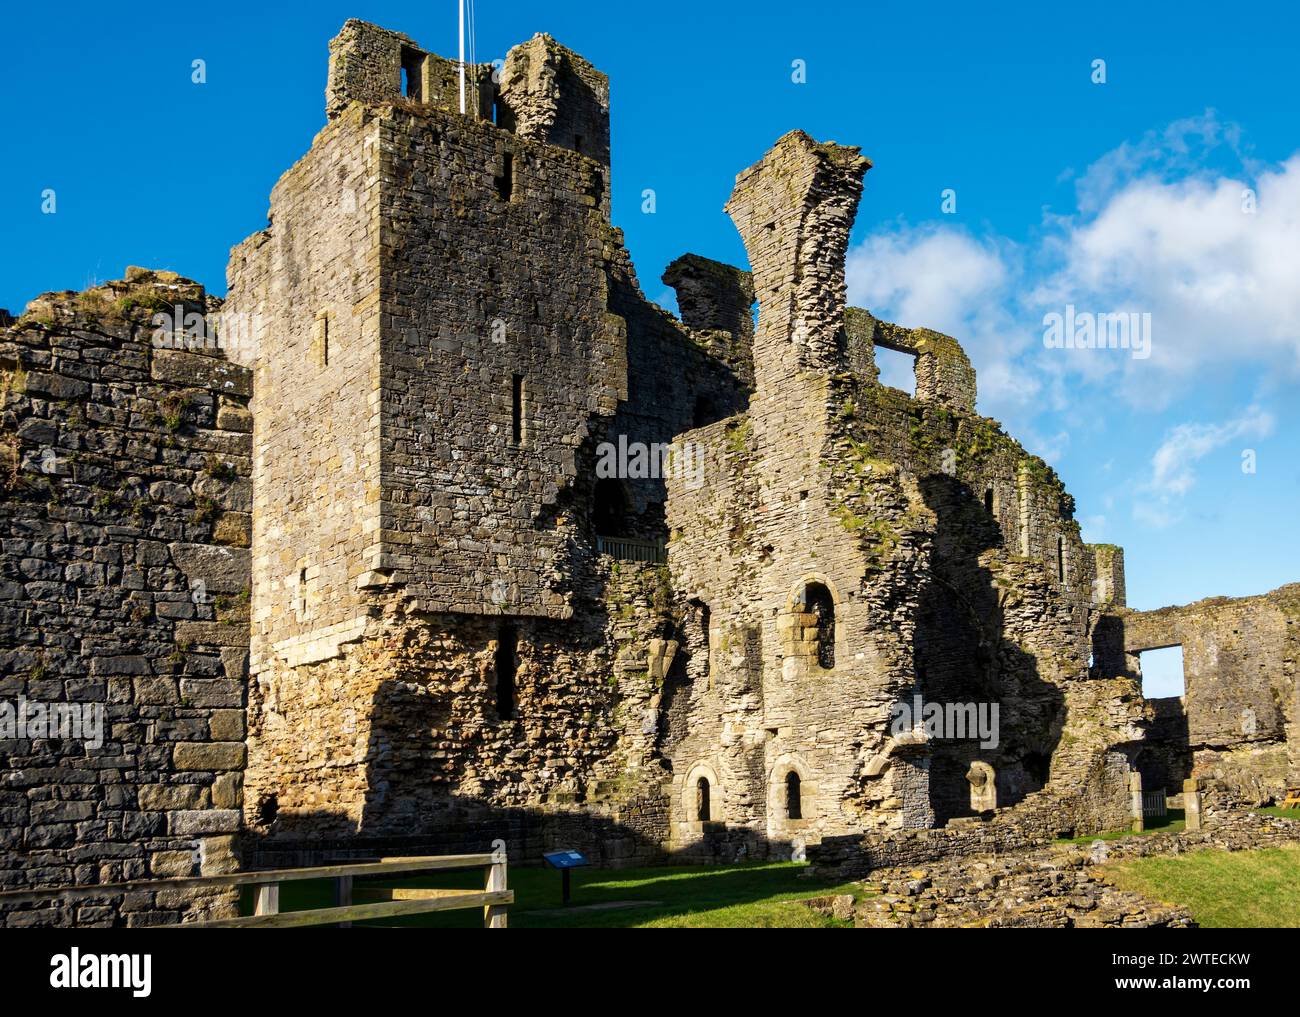 Middleham Castle, Wensleydale, Yorkshire Dales.  The castle is associated with the powerful Neville family. Stock Photo